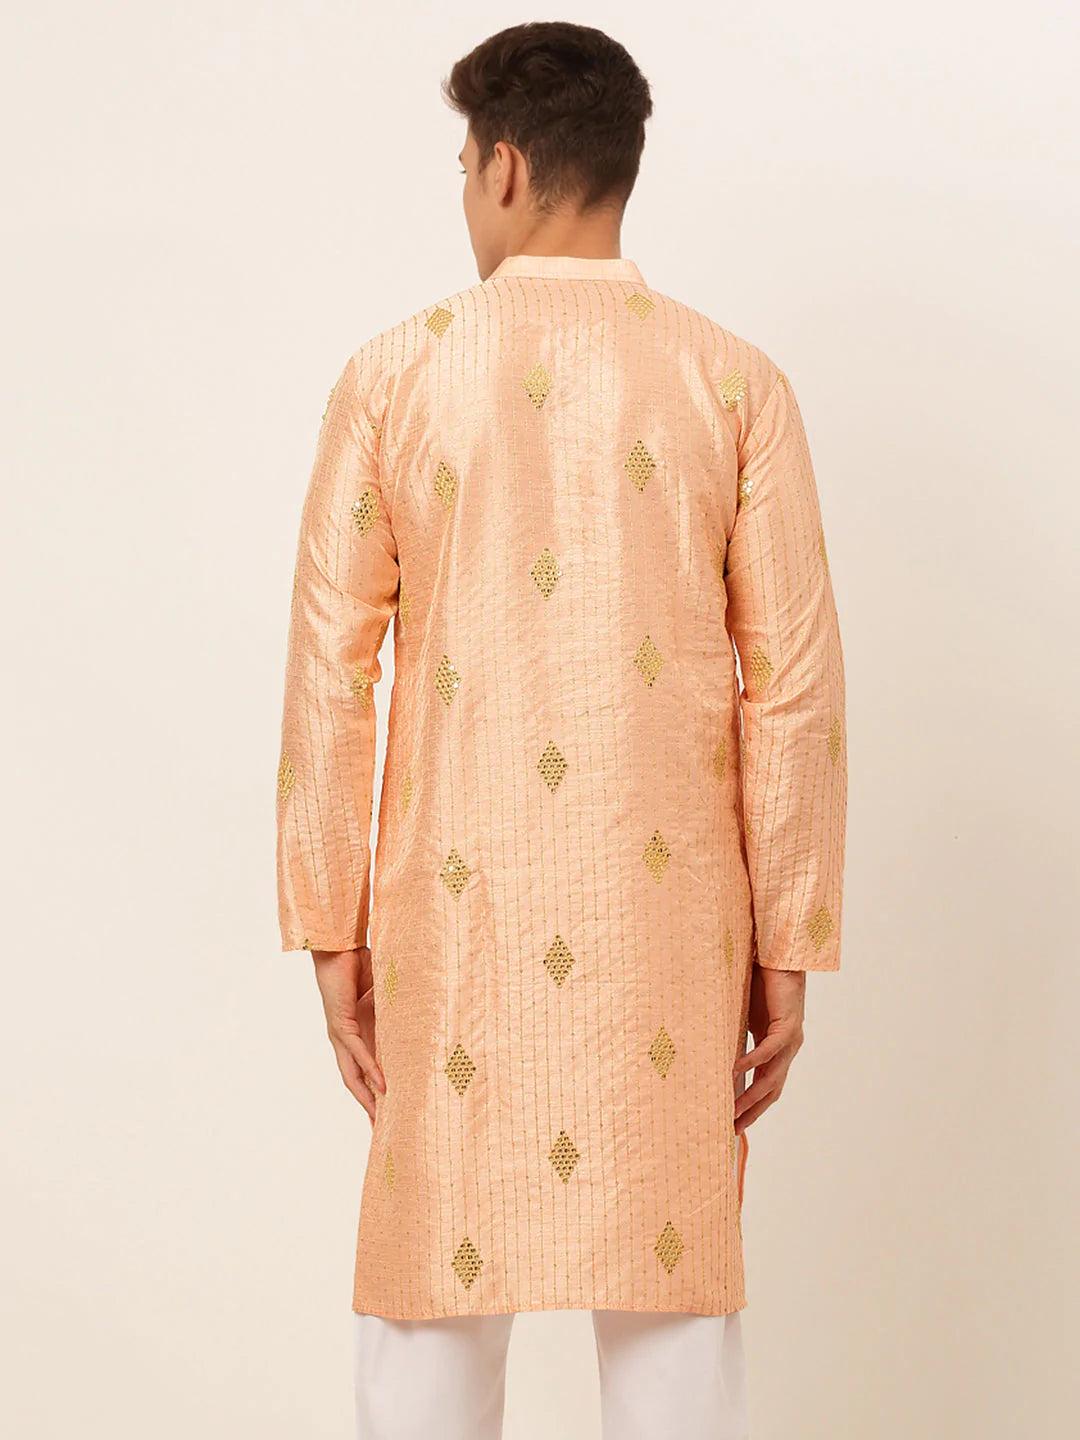 Jompers Men Peach Embroidered Sequinned Kurta Only ( KO 673 Peach )